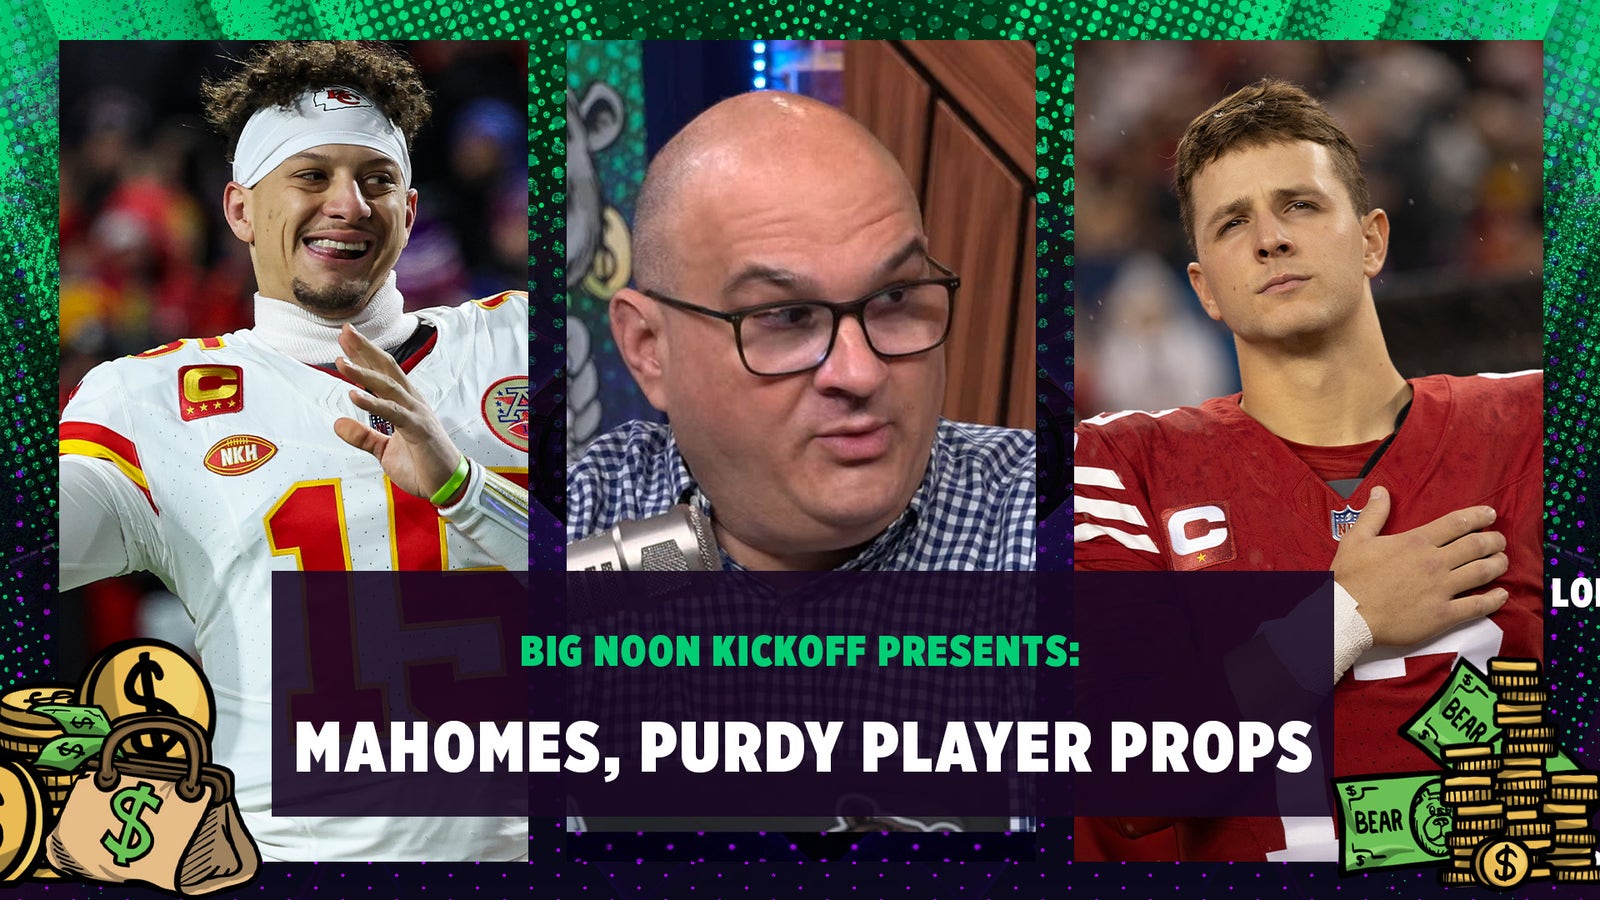 Patrick Mahomes, Brock Purdy Conference Championship player props